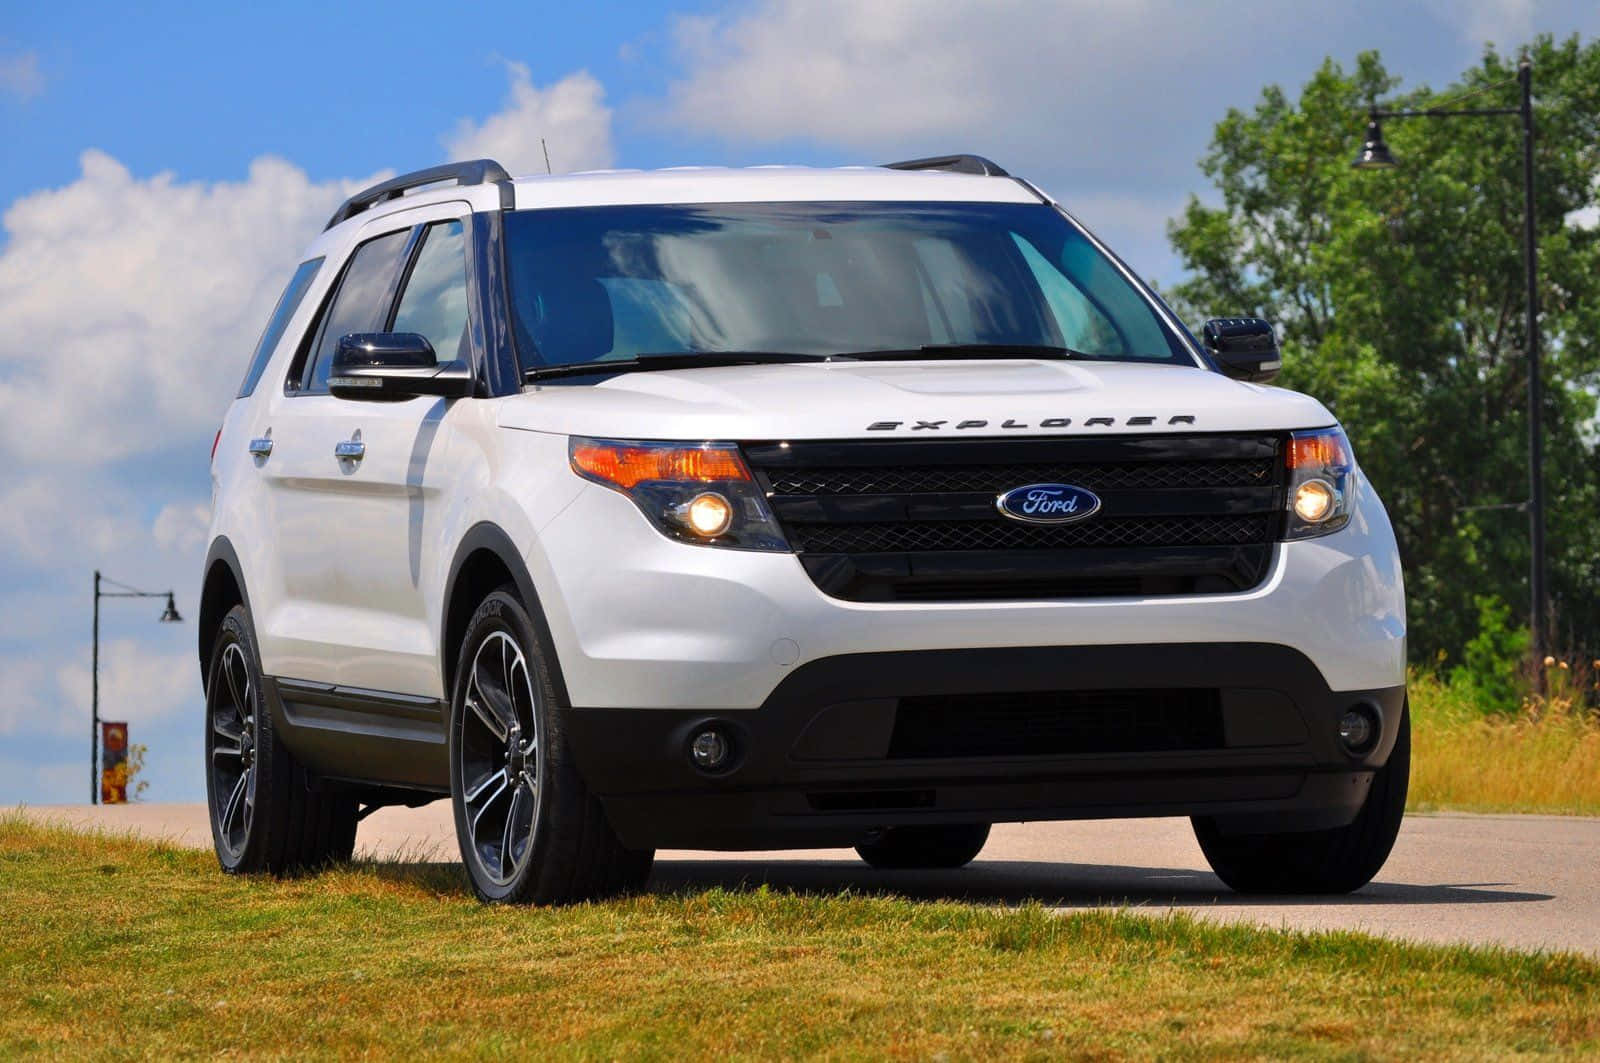 Ford Explorer 2021 parked in the outdoors Wallpaper